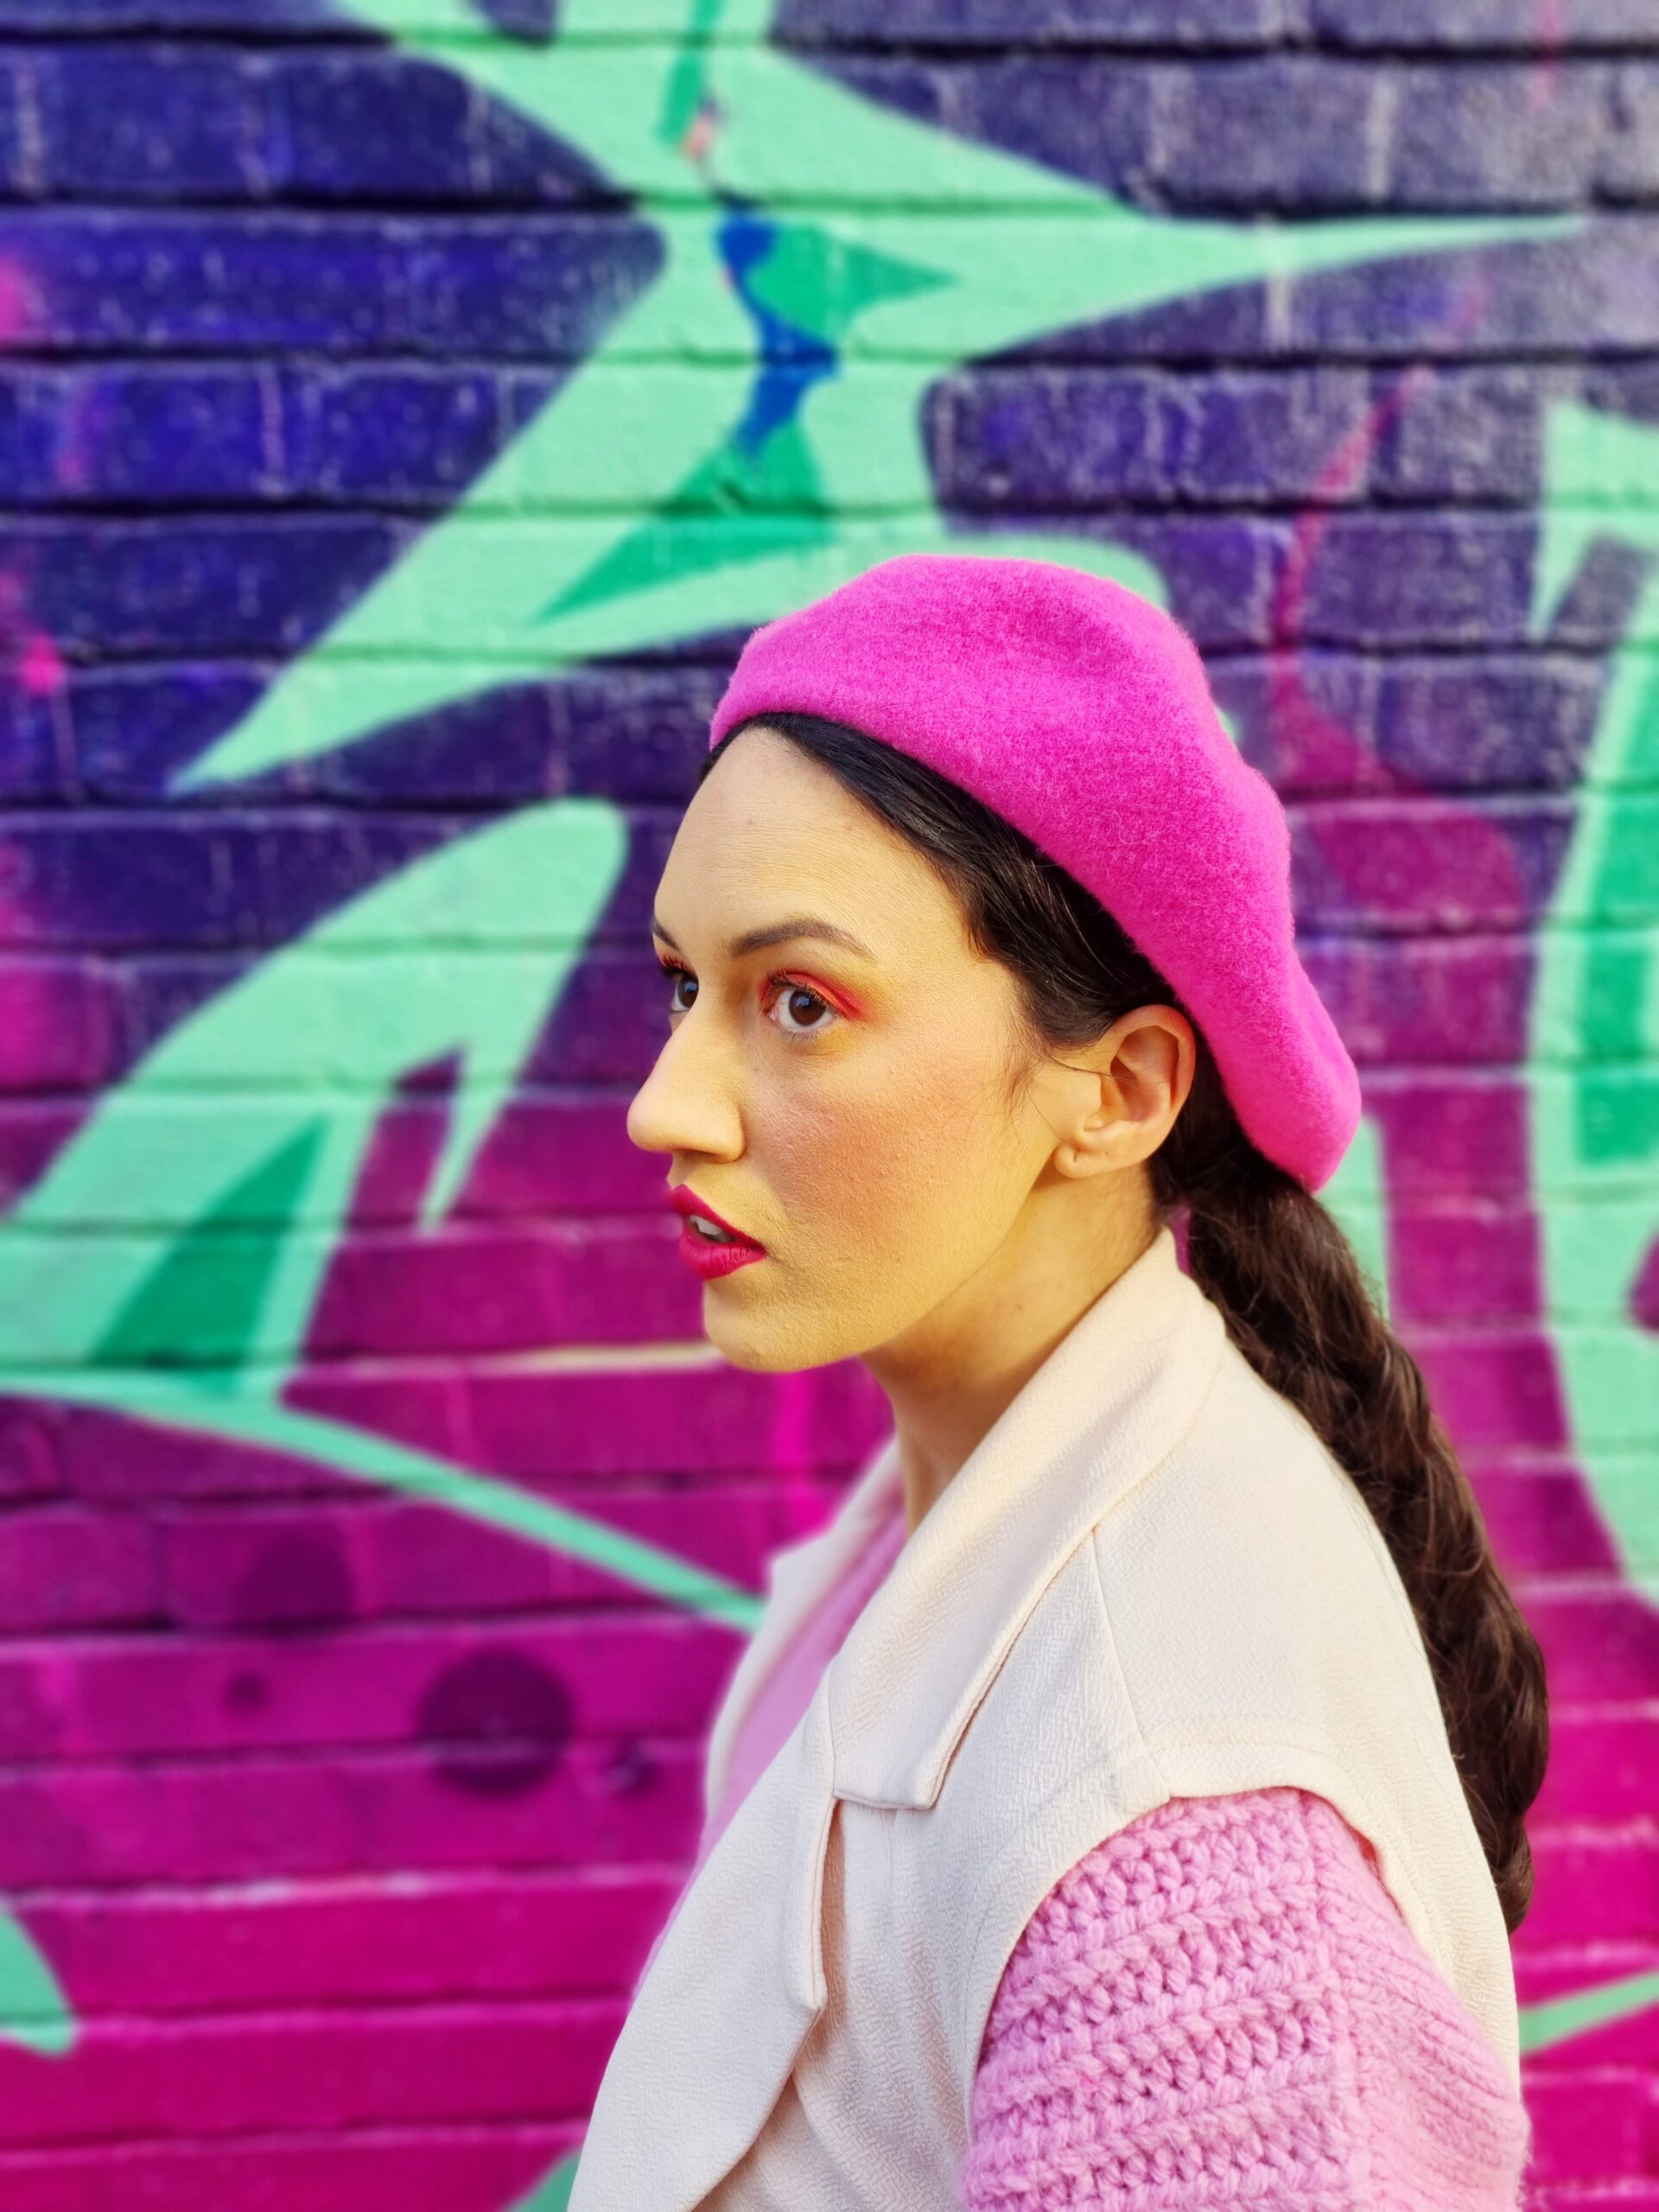 <img src="ana.jpg" alt="ana in pink beret and colourful clothes"/>